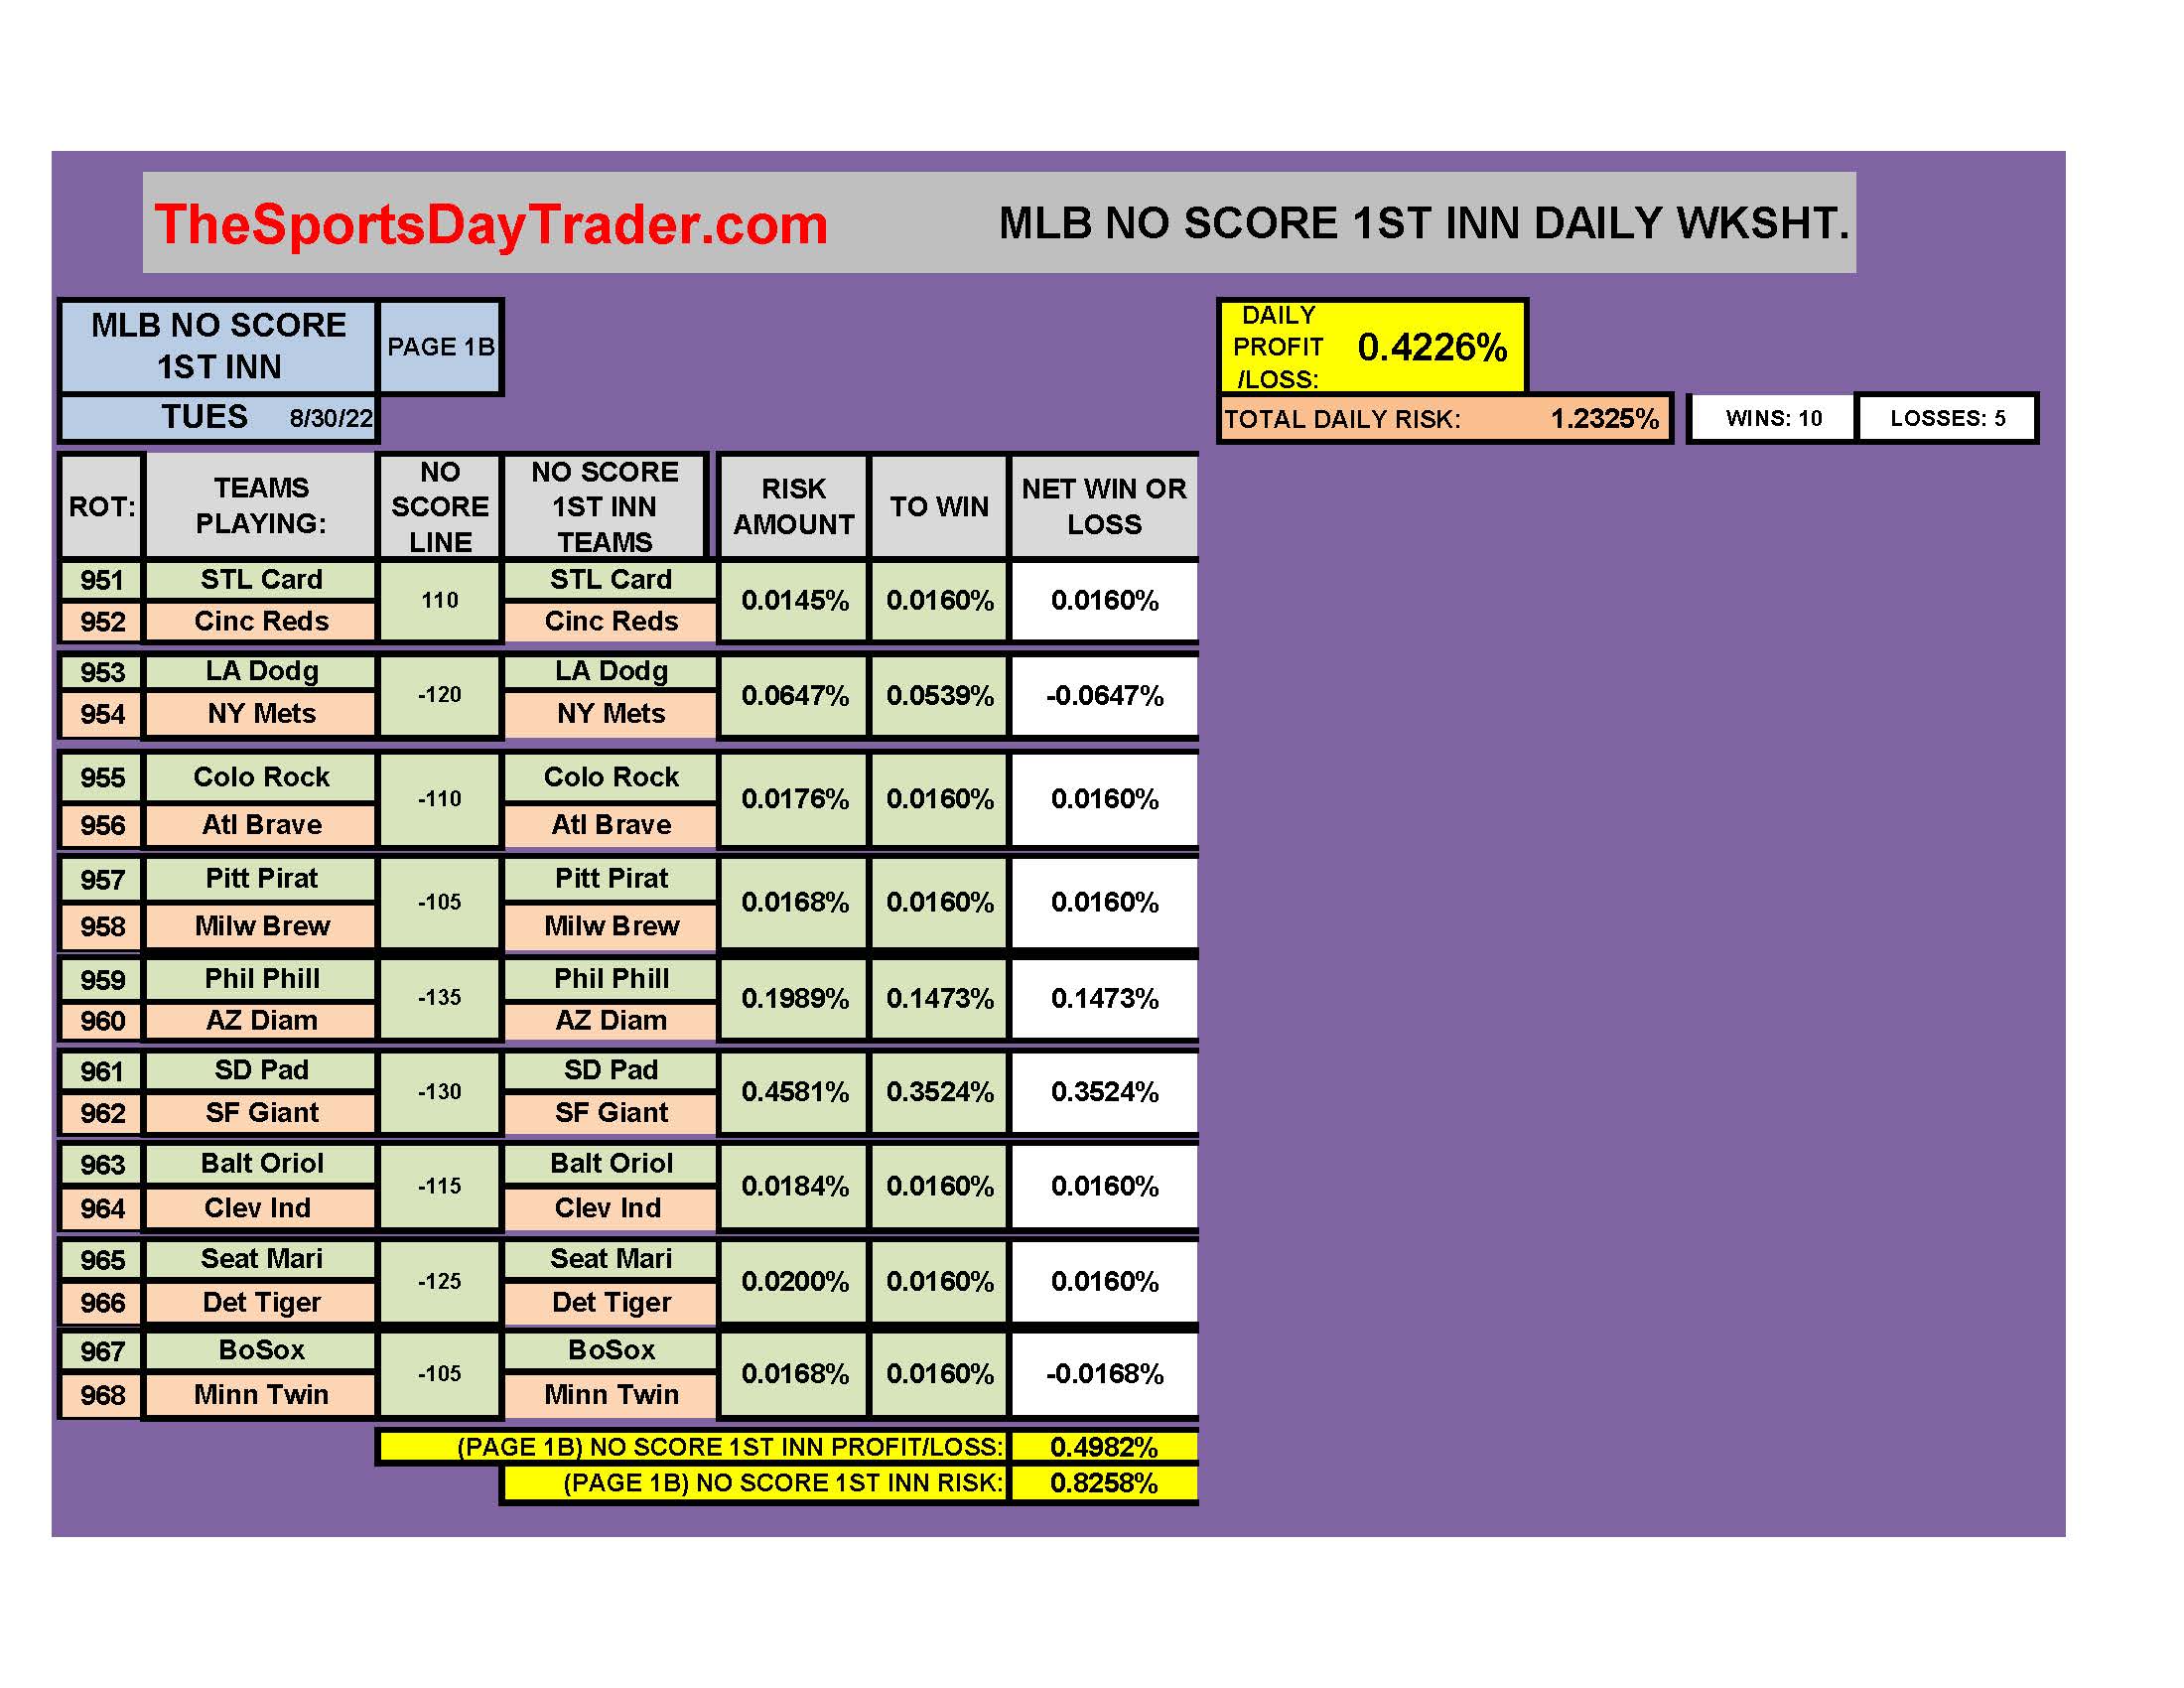 MLB 8/30/22 NO SCORE 1ST INNING DAILY RESULTS page 1